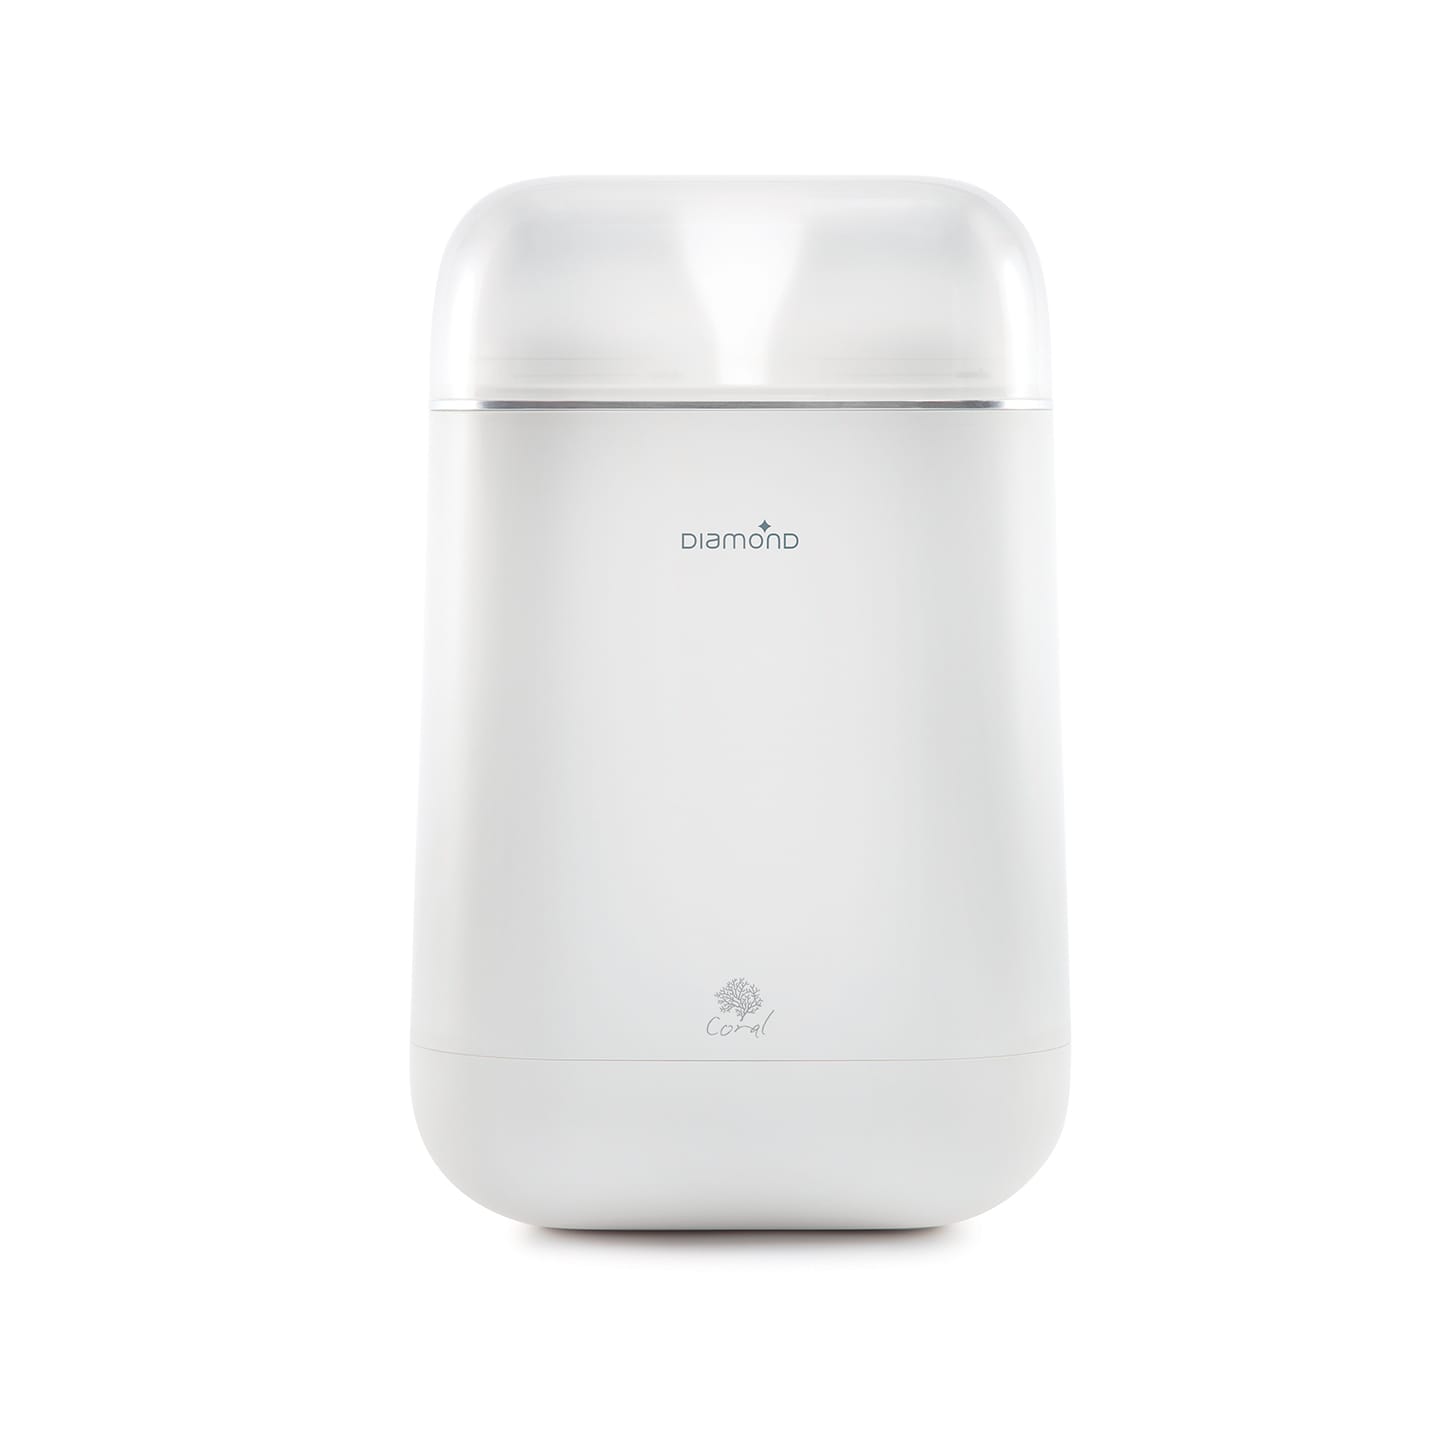 Front view of a white Diamond Coral water filter with a smooth, rounded design and a transparent top.